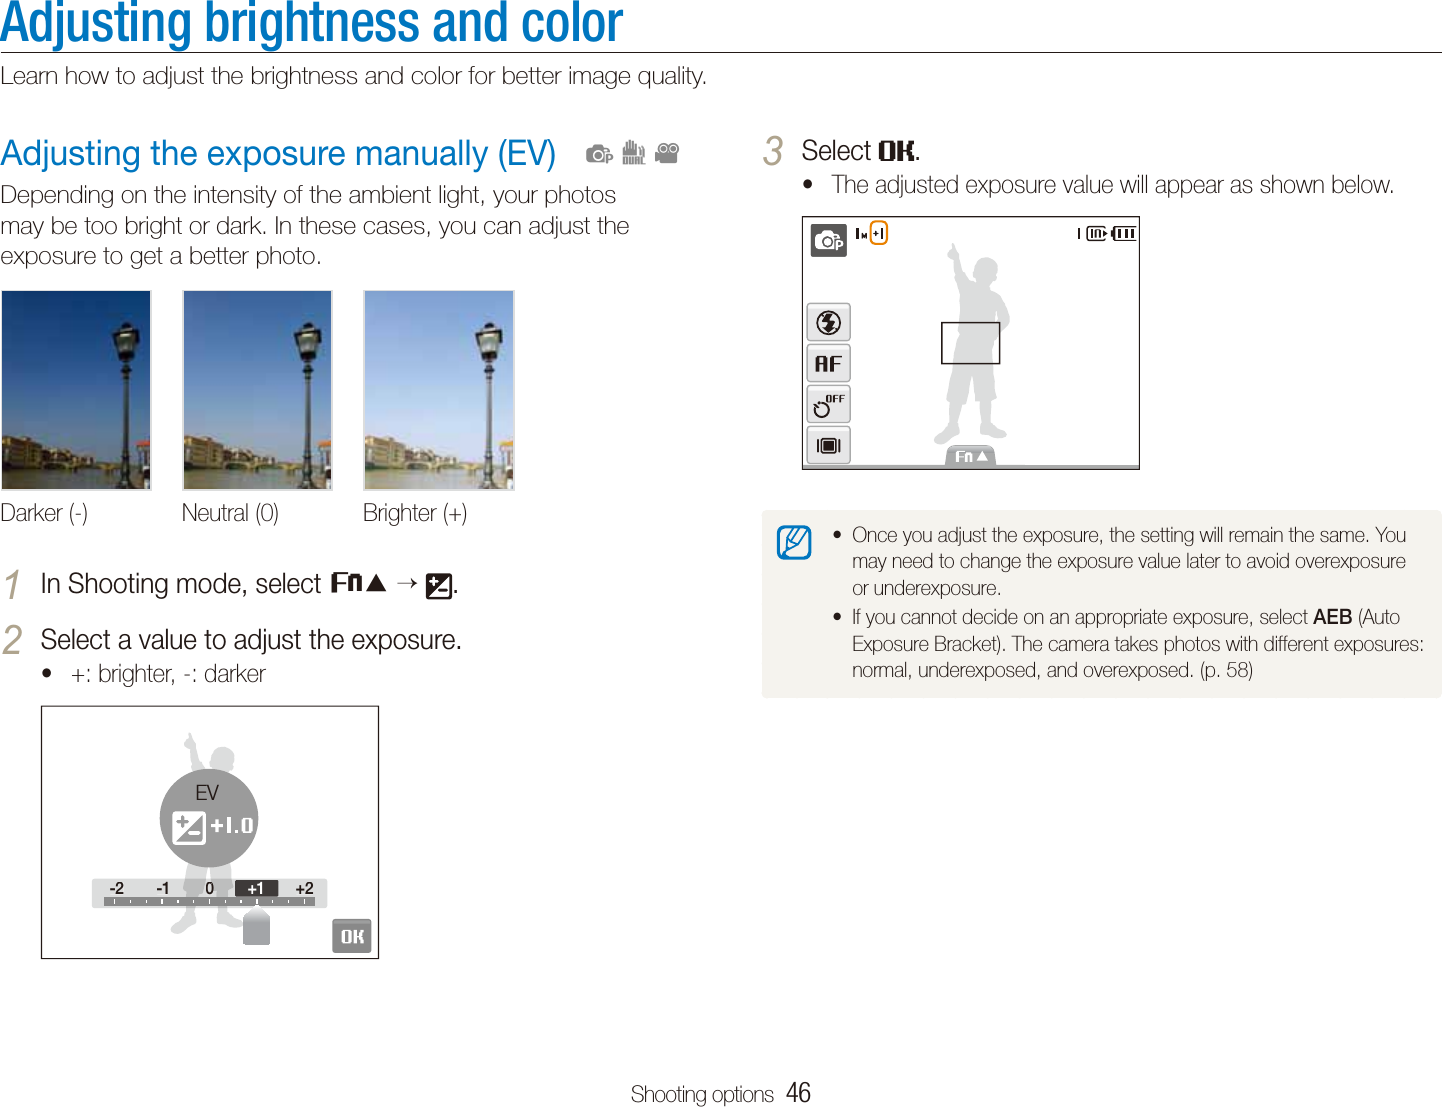 Shooting options  46Adjusting the exposure manually (EV)Depending on the intensity of the ambient light, your photos may be too bright or dark. In these cases, you can adjust the exposure to get a better photo.Darker (-) Neutral (0) Brighter (+)In Shooting mode, select 1 f   .Select a value to adjust the exposure.2 +: brighter, -: darkert-2 -1 0 +2-2-100+2+1EV  pdvAdjusting brightness and colorLearn how to adjust the brightness and color for better image quality.Select 3 .The adjusted exposure value will appear as shown below.tOnce you adjust the exposure, the setting will remain the same. You tmay need to change the exposure value later to avoid overexposure or underexposure. If you cannot decide on an appropriate exposure, select t AEB (Auto Exposure Bracket). The camera takes photos with different exposures: normal, underexposed, and overexposed. (p. 58)